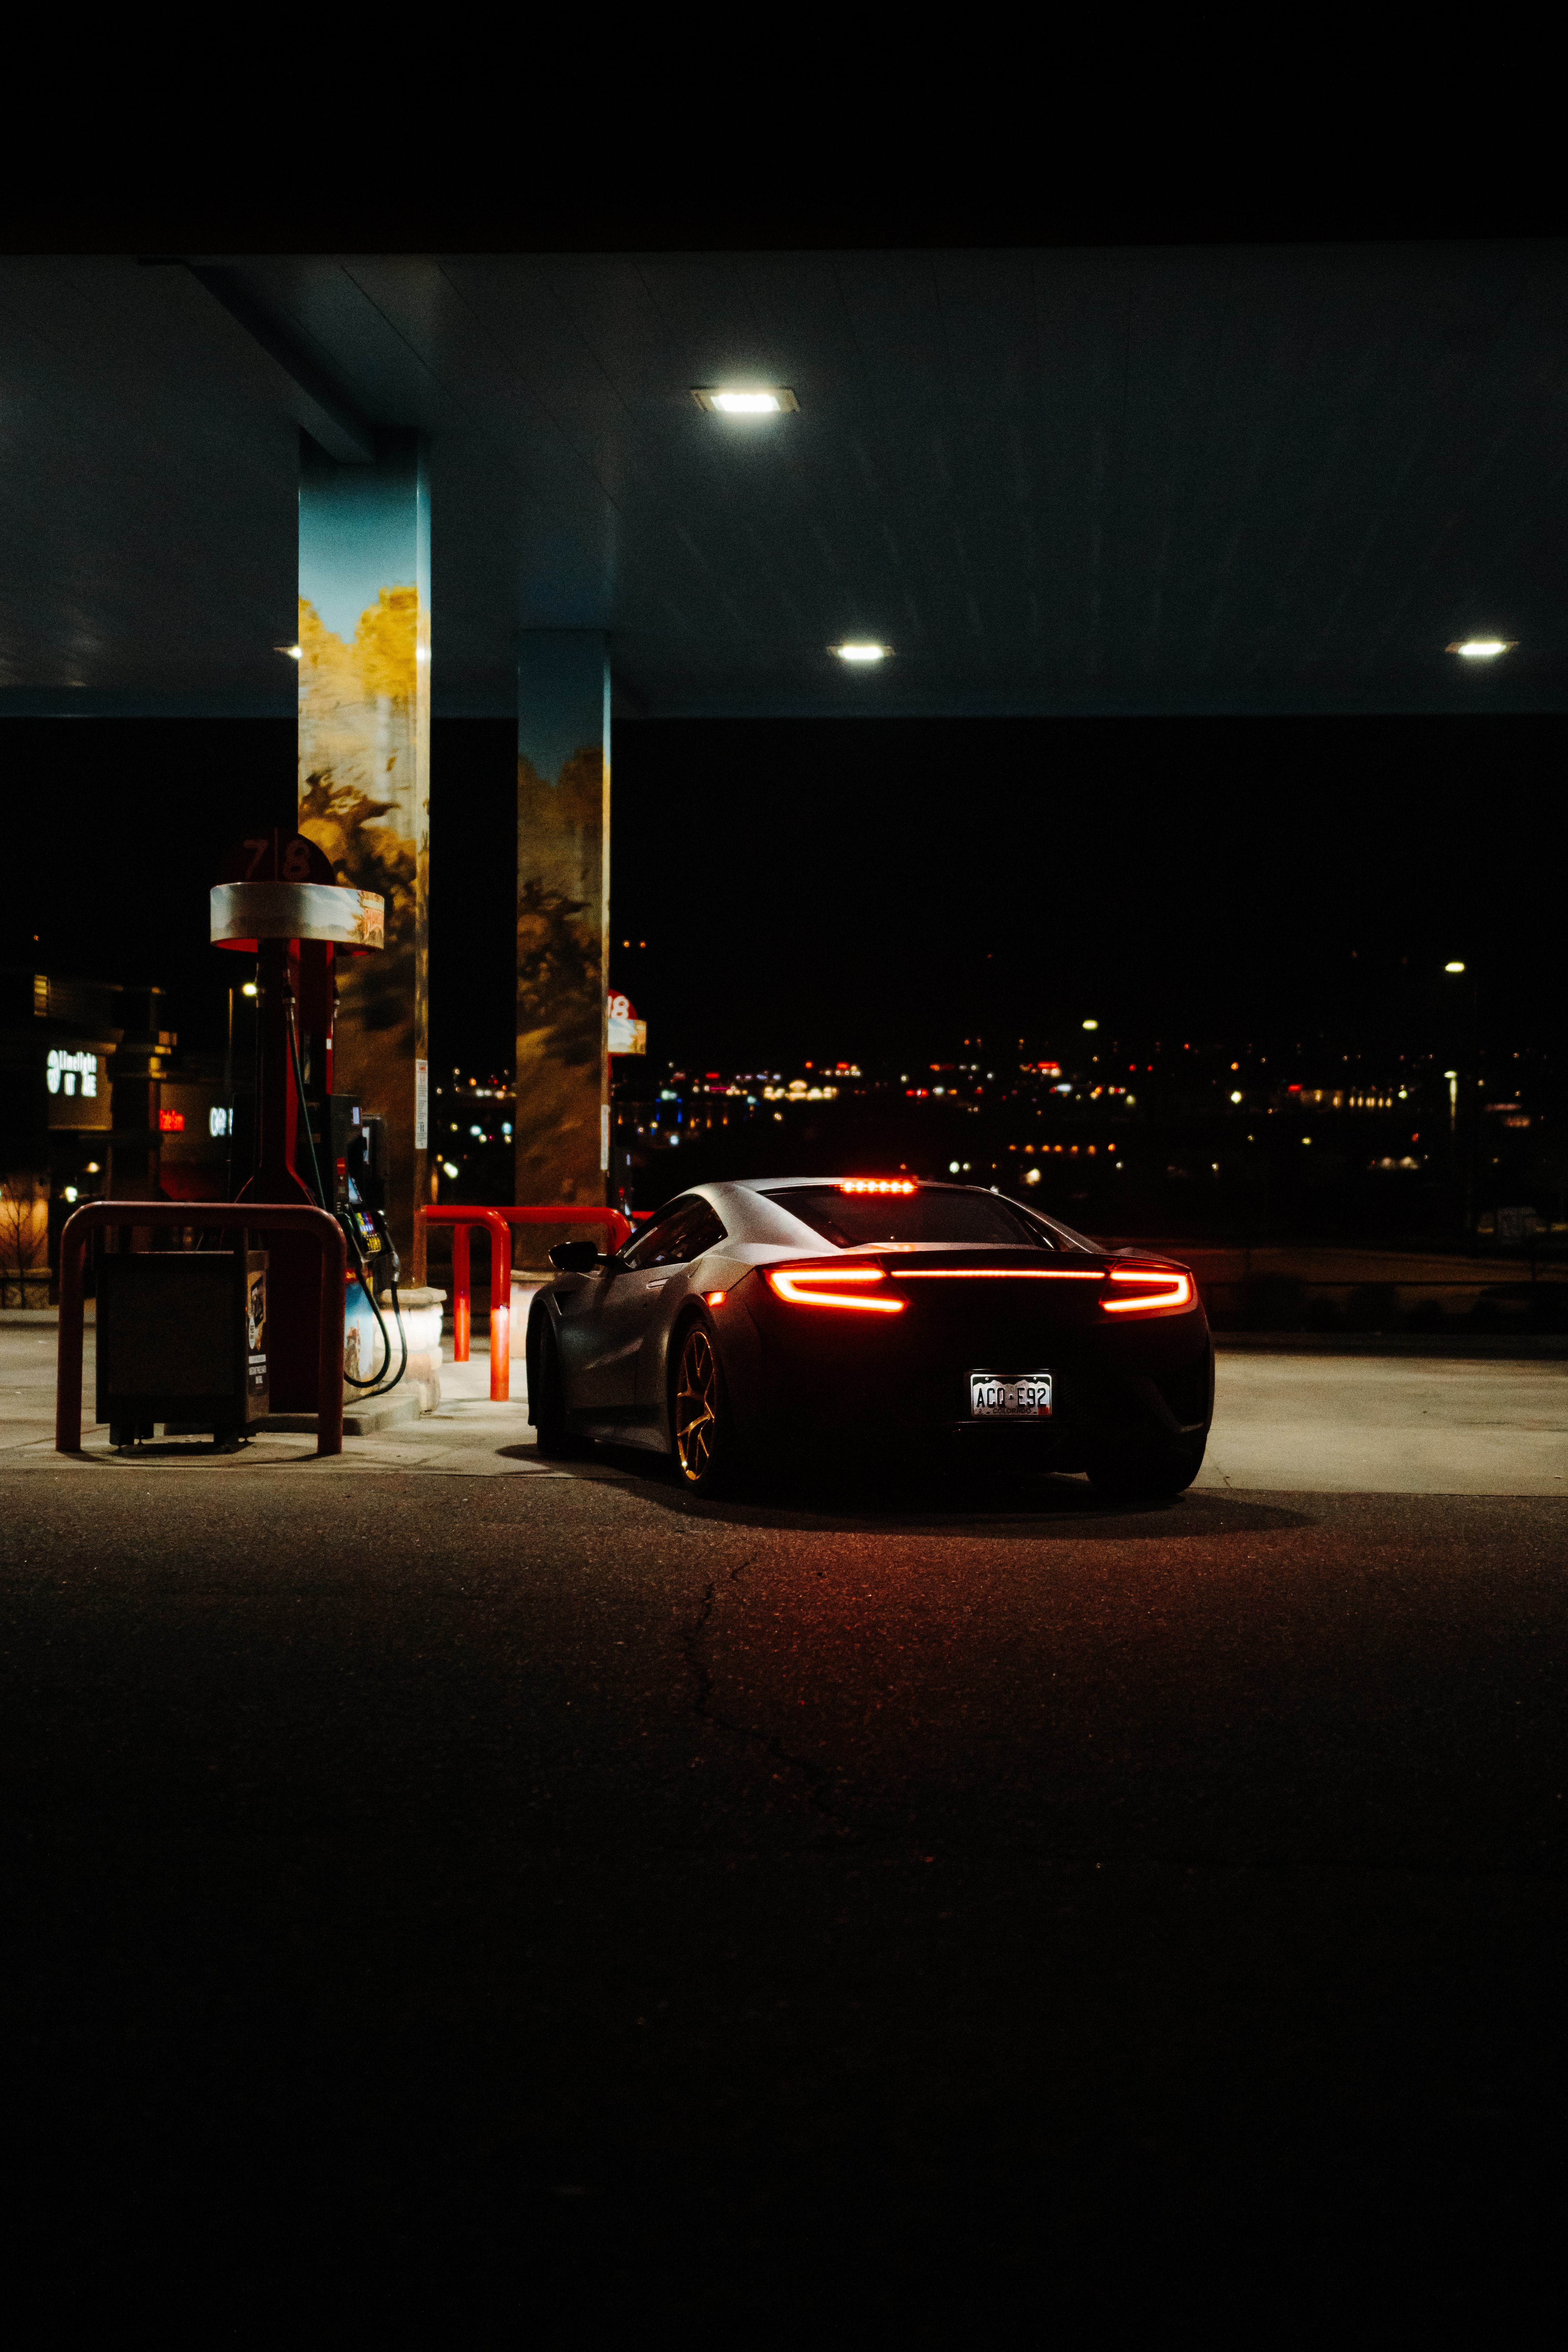 rear view, cars, back view, black, lights, car, lanterns, refueling, filling cellphone